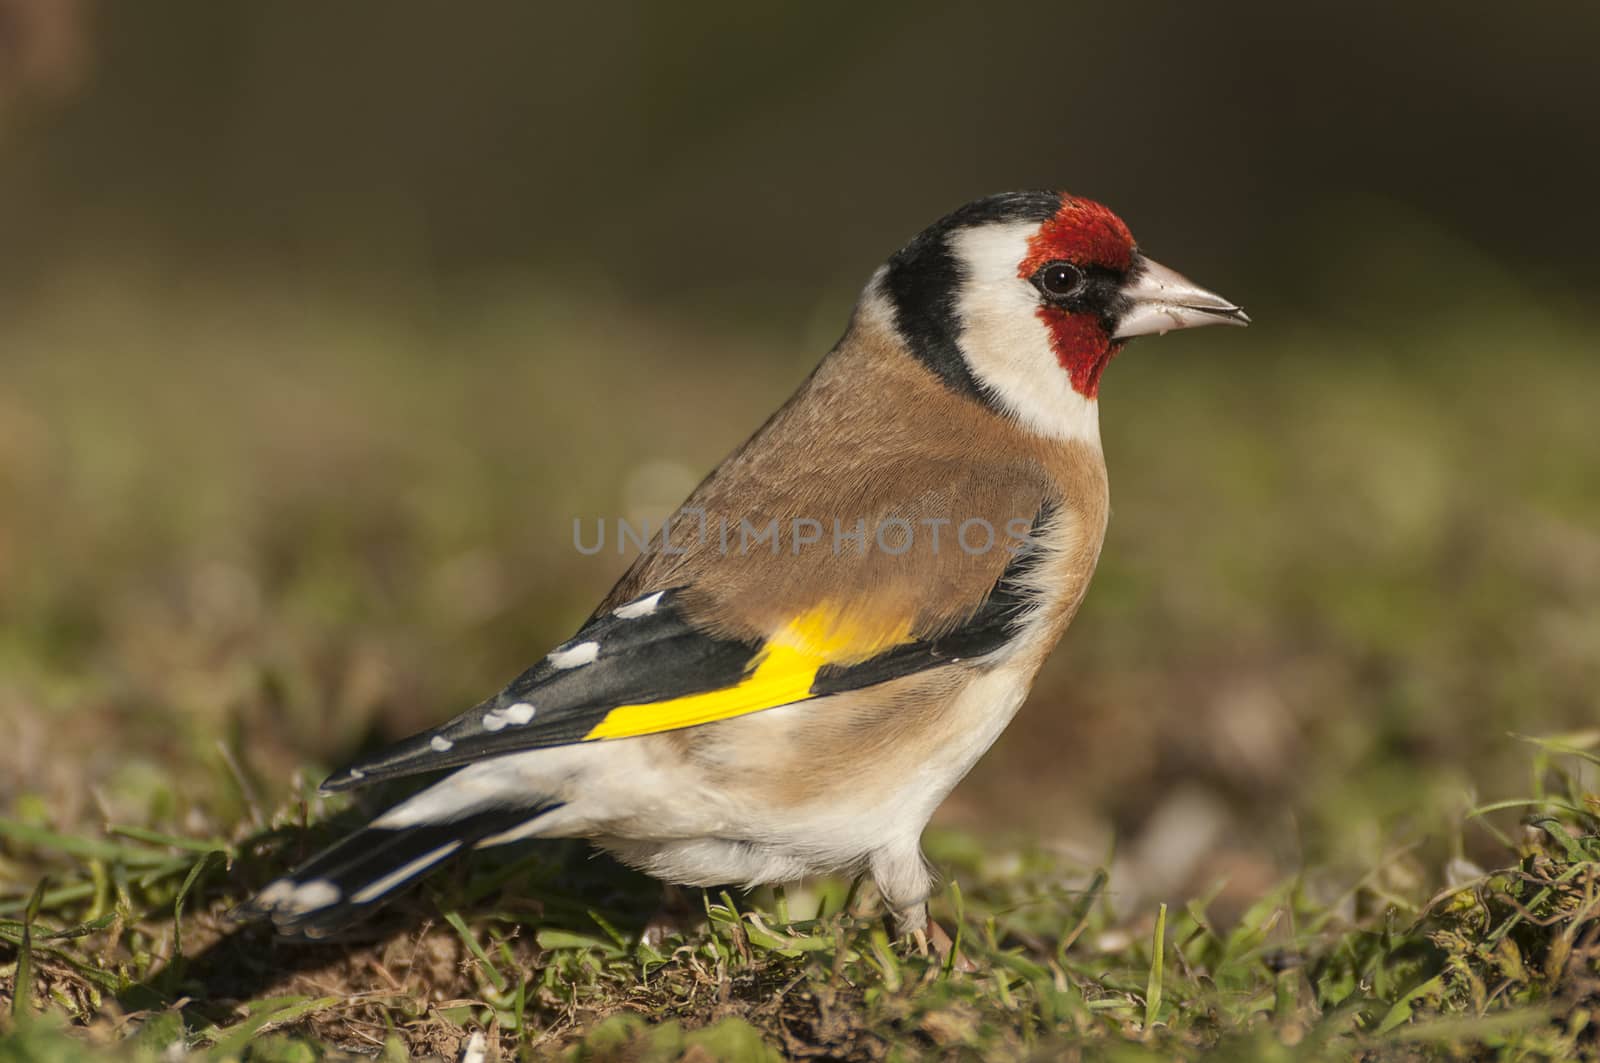 Goldfinch - Carduelis carduelis, portrait looking for food, plumage and colors